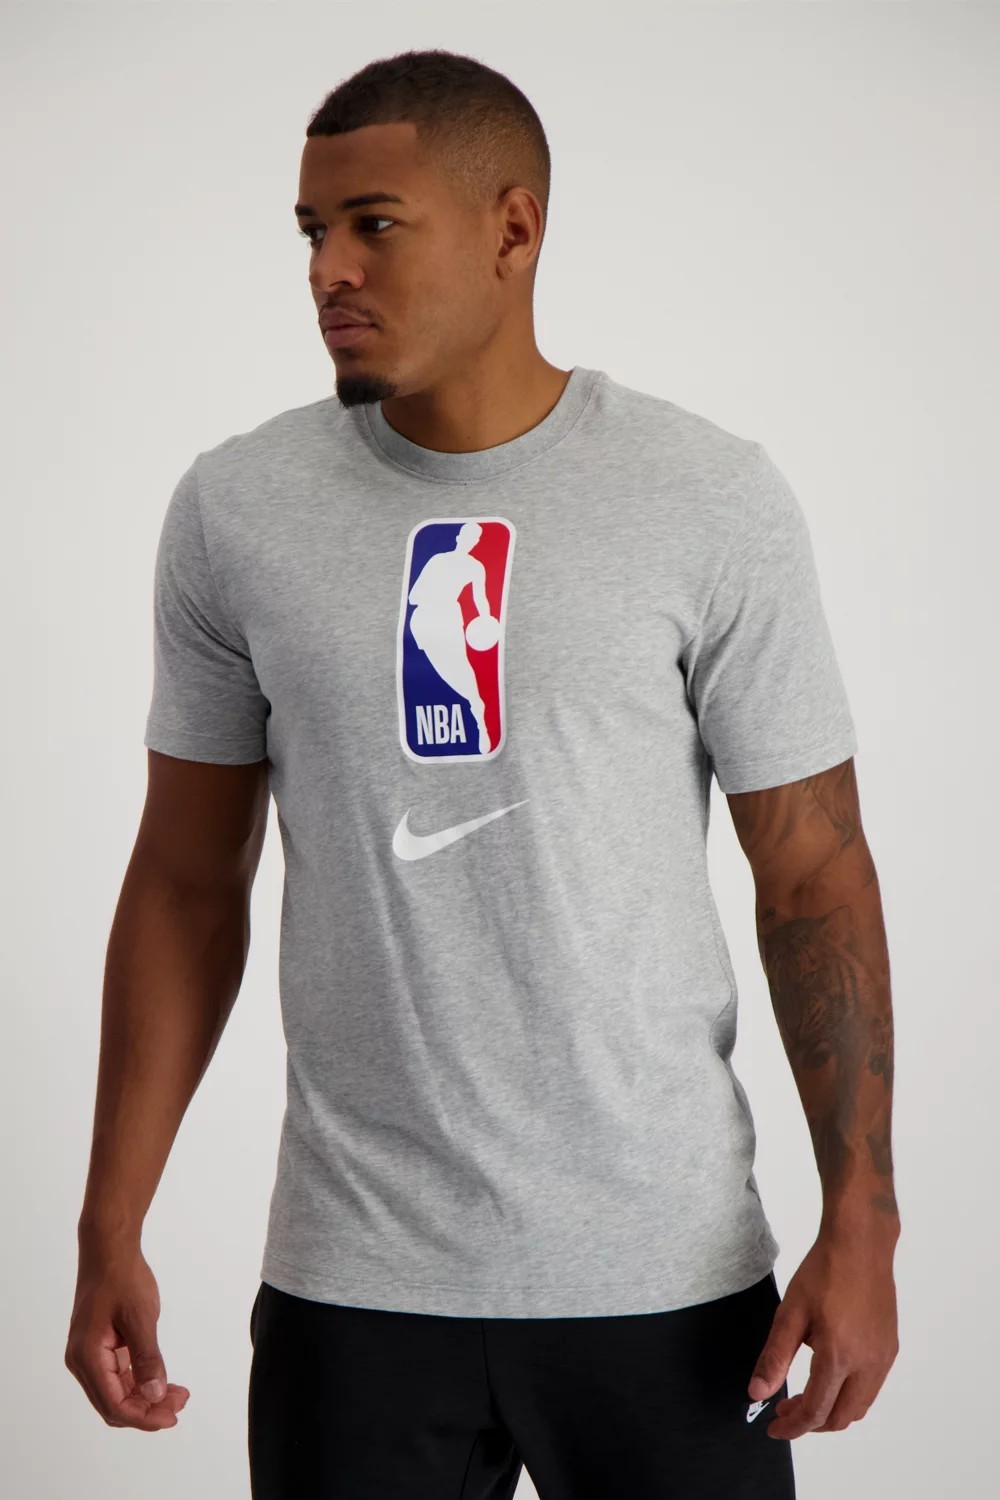 Nike Team 31 Dri-FIT NBA T-Shirt RESPECTS TO THE LEAGUE. Pay tribute to  Team 31—aka the NBA—in this Nike Dri-FIT NBA T-Shirt, a…